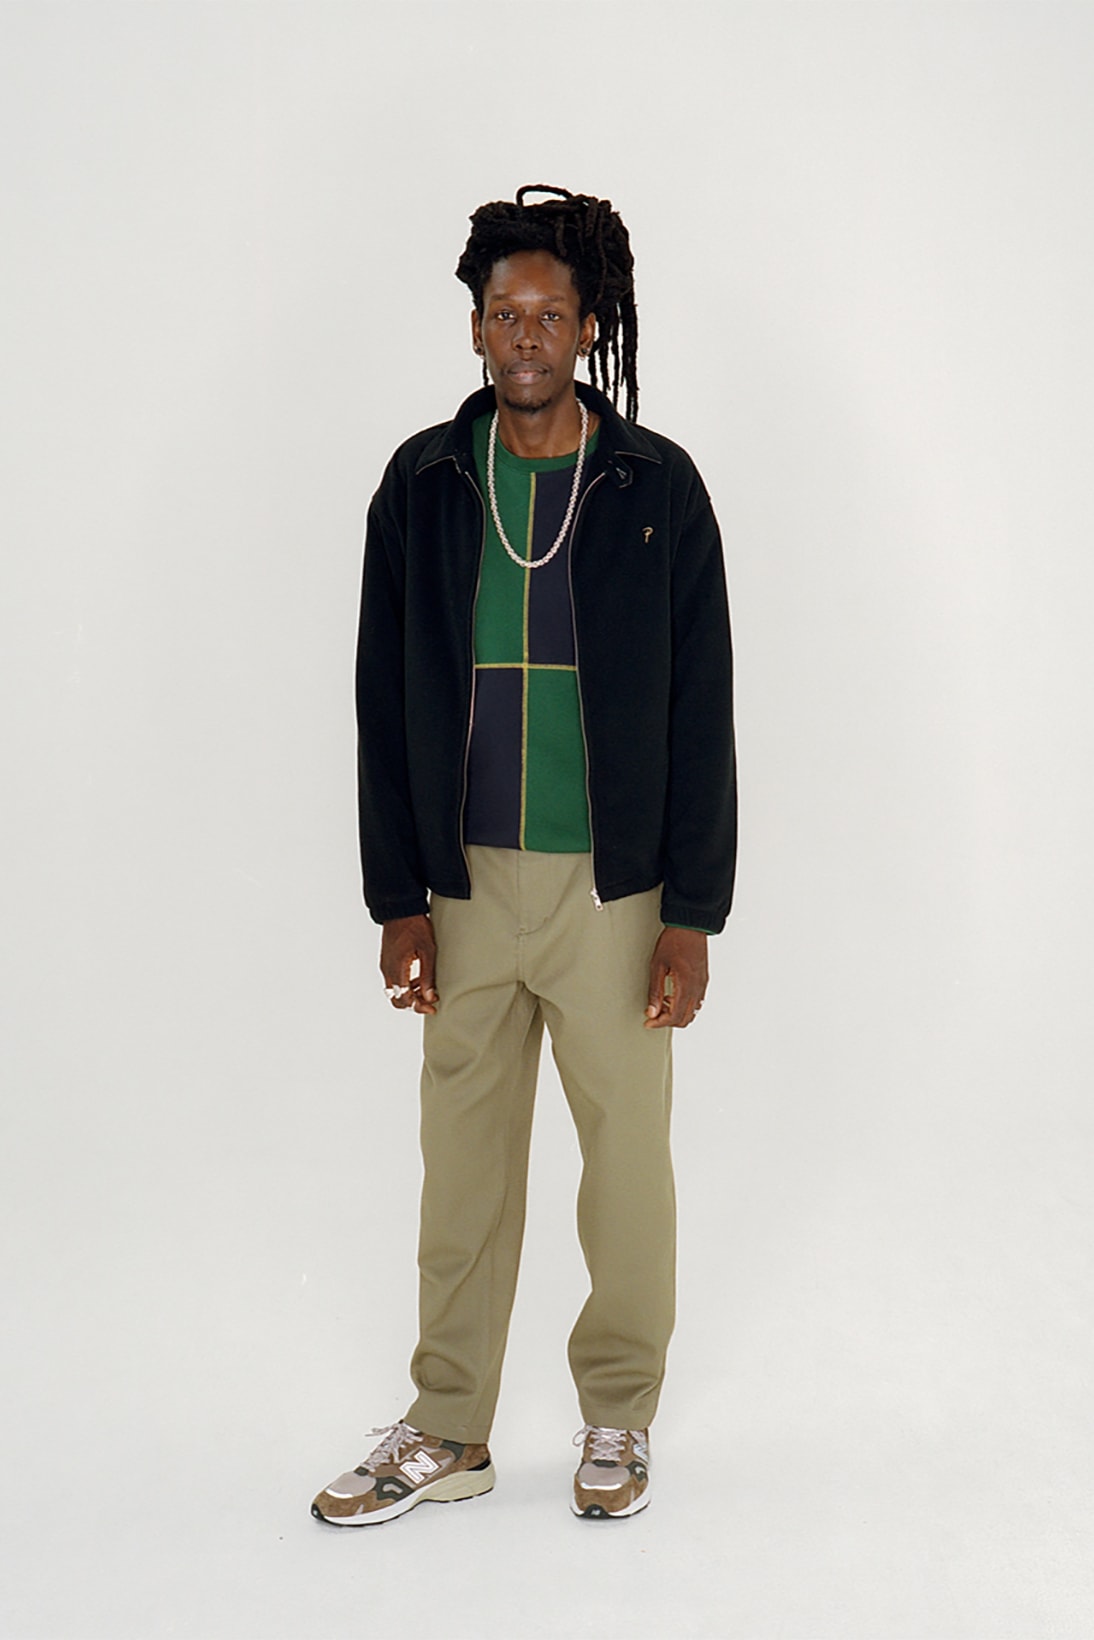 patta fall winter collection outerwear knitwear sweaters jackets hoodies shirts pants